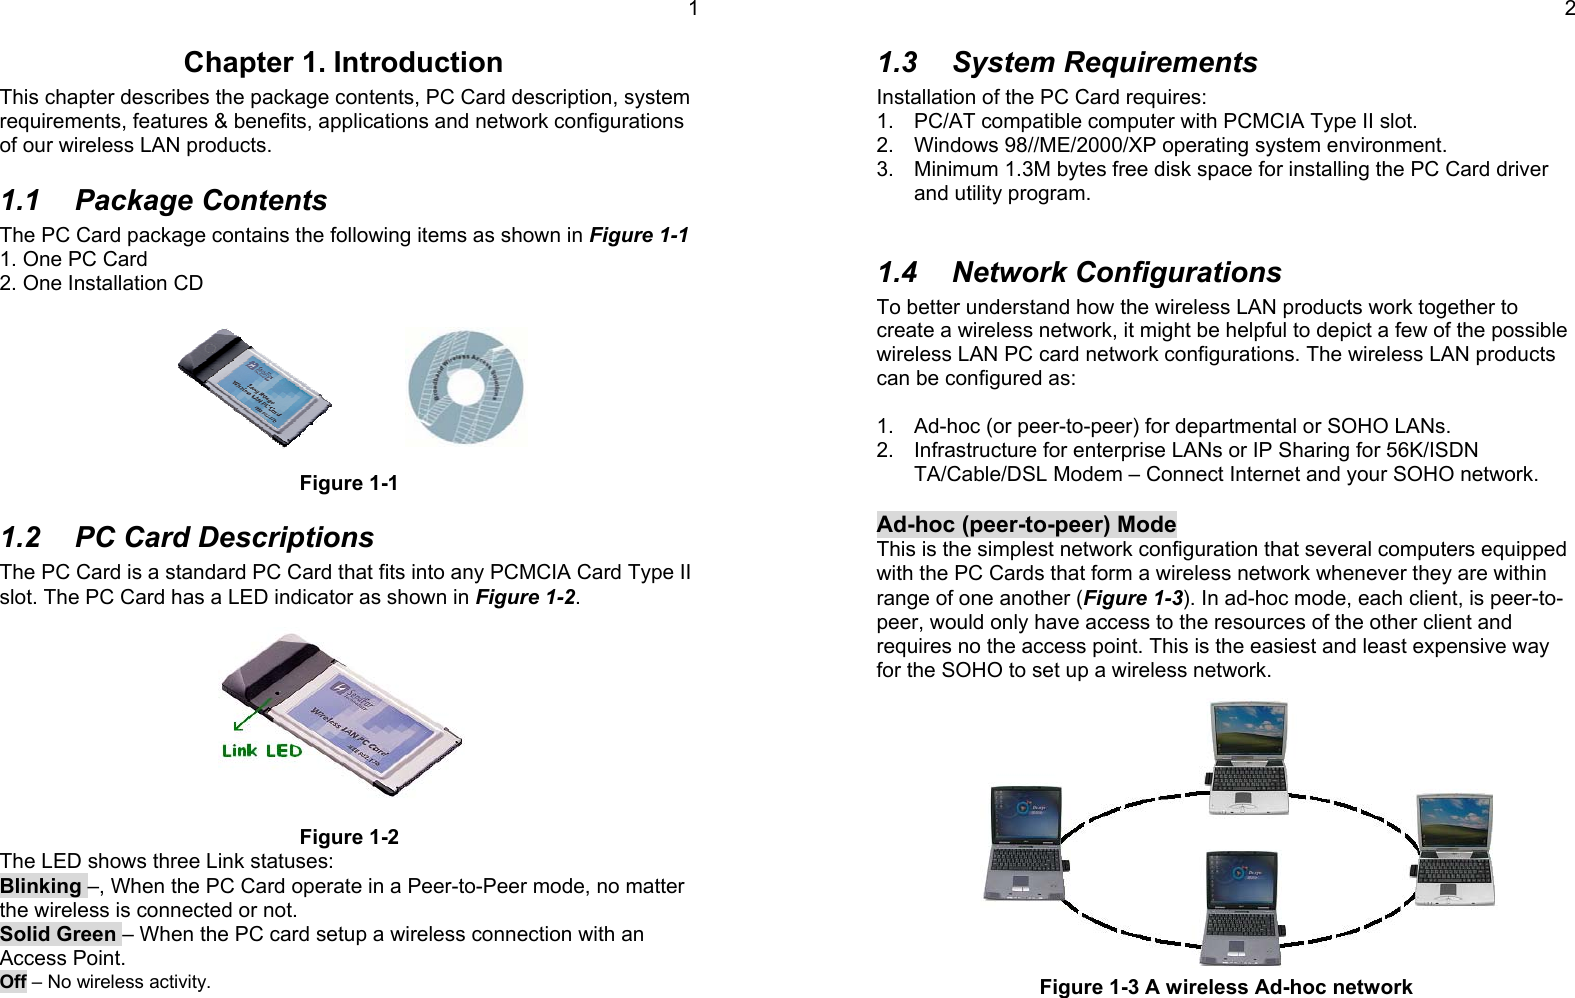 1Chapter 1. IntroductionThis chapter describes the package contents, PC Card description, systemrequirements, features &amp; benefits, applications and network configurationsof our wireless LAN products.1.1 Package ContentsThe PC Card package contains the following items as shown in Figure 1-11. One PC Card2. One Installation CDFigure 1-11.2  PC Card DescriptionsThe PC Card is a standard PC Card that fits into any PCMCIA Card Type IIslot. The PC Card has a LED indicator as shown in Figure 1-2.Figure 1-2The LED shows three Link statuses:Blinking –, When the PC Card operate in a Peer-to-Peer mode, no matterthe wireless is connected or not.Solid Green – When the PC card setup a wireless connection with anAccess Point.Off – No wireless activity.21.3 System RequirementsInstallation of the PC Card requires:1.  PC/AT compatible computer with PCMCIA Type II slot.2.  Windows 98//ME/2000/XP operating system environment.3.  Minimum 1.3M bytes free disk space for installing the PC Card driverand utility program.1.4 Network ConfigurationsTo better understand how the wireless LAN products work together tocreate a wireless network, it might be helpful to depict a few of the possiblewireless LAN PC card network configurations. The wireless LAN productscan be configured as:1.  Ad-hoc (or peer-to-peer) for departmental or SOHO LANs.2.  Infrastructure for enterprise LANs or IP Sharing for 56K/ISDNTA/Cable/DSL Modem – Connect Internet and your SOHO network.Ad-hoc (peer-to-peer) ModeThis is the simplest network configuration that several computers equippedwith the PC Cards that form a wireless network whenever they are withinrange of one another (Figure 1-3). In ad-hoc mode, each client, is peer-to-peer, would only have access to the resources of the other client andrequires no the access point. This is the easiest and least expensive wayfor the SOHO to set up a wireless network.Figure 1-3 A wireless Ad-hoc network